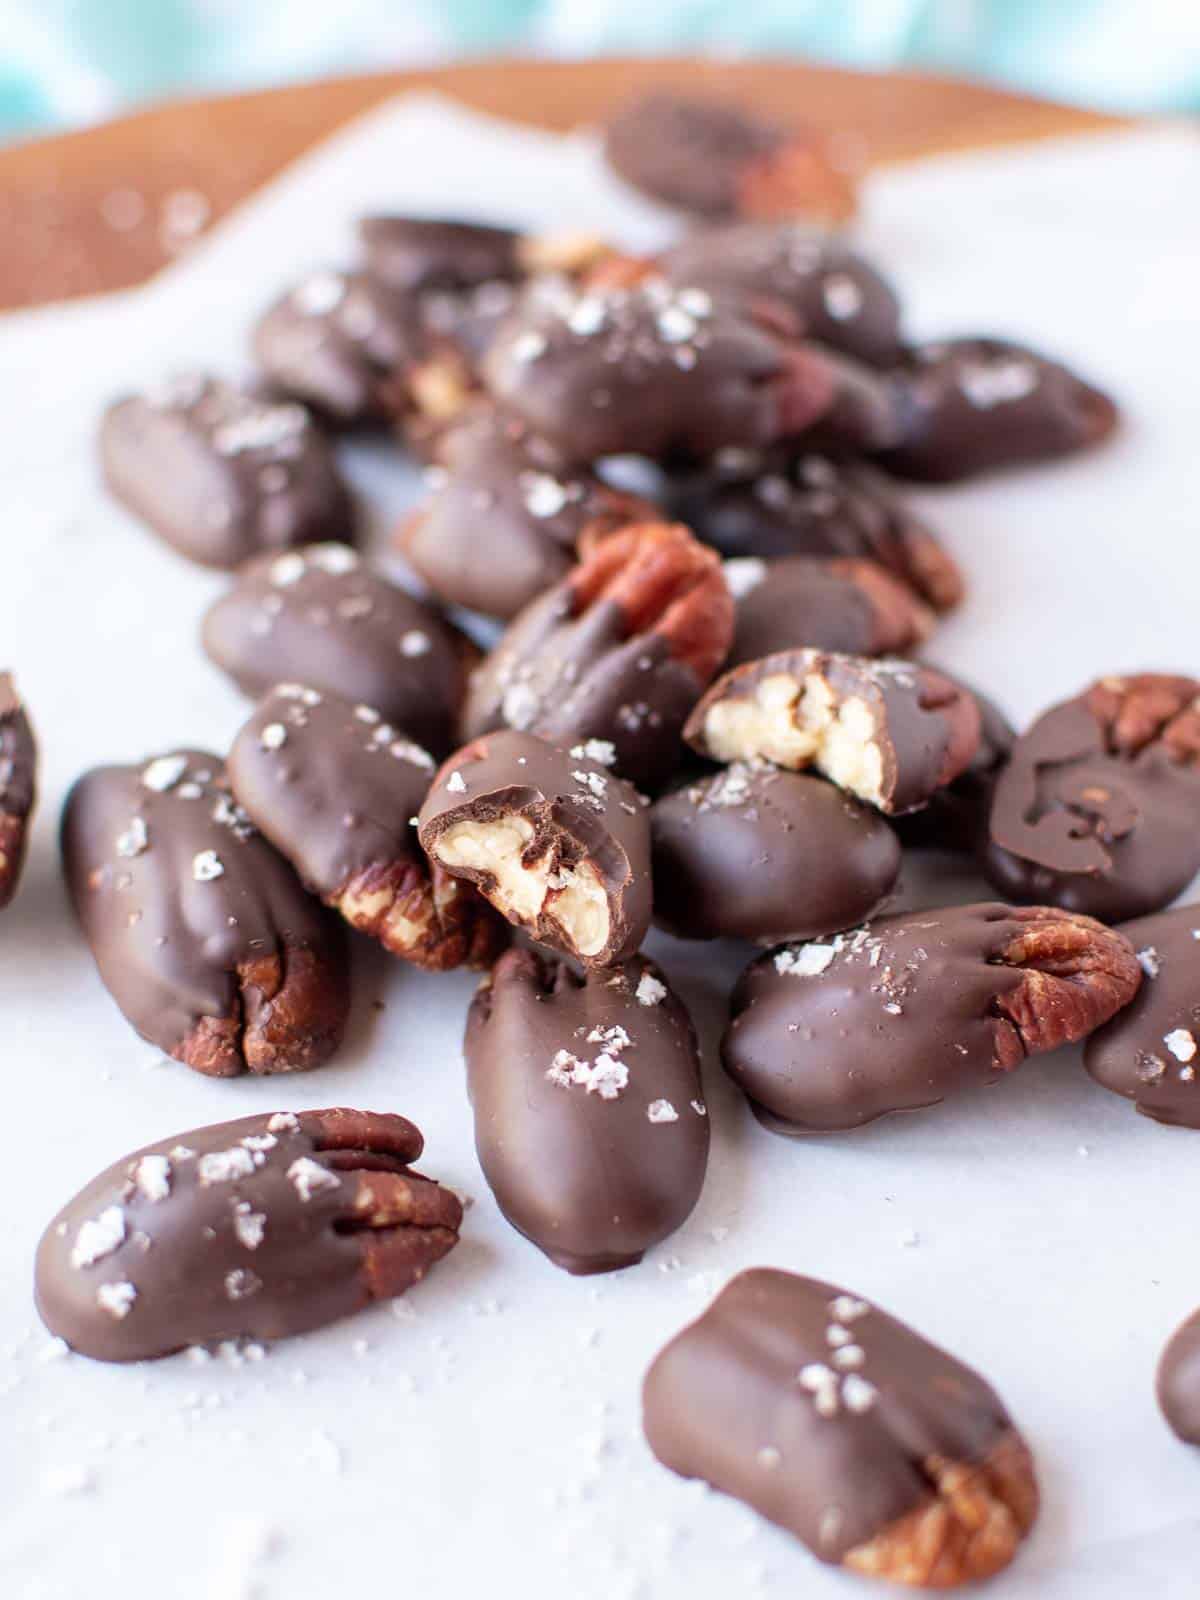 Pile of chocolate dipped pecans sprinkled with flaked salt and resting on white parchment paper.